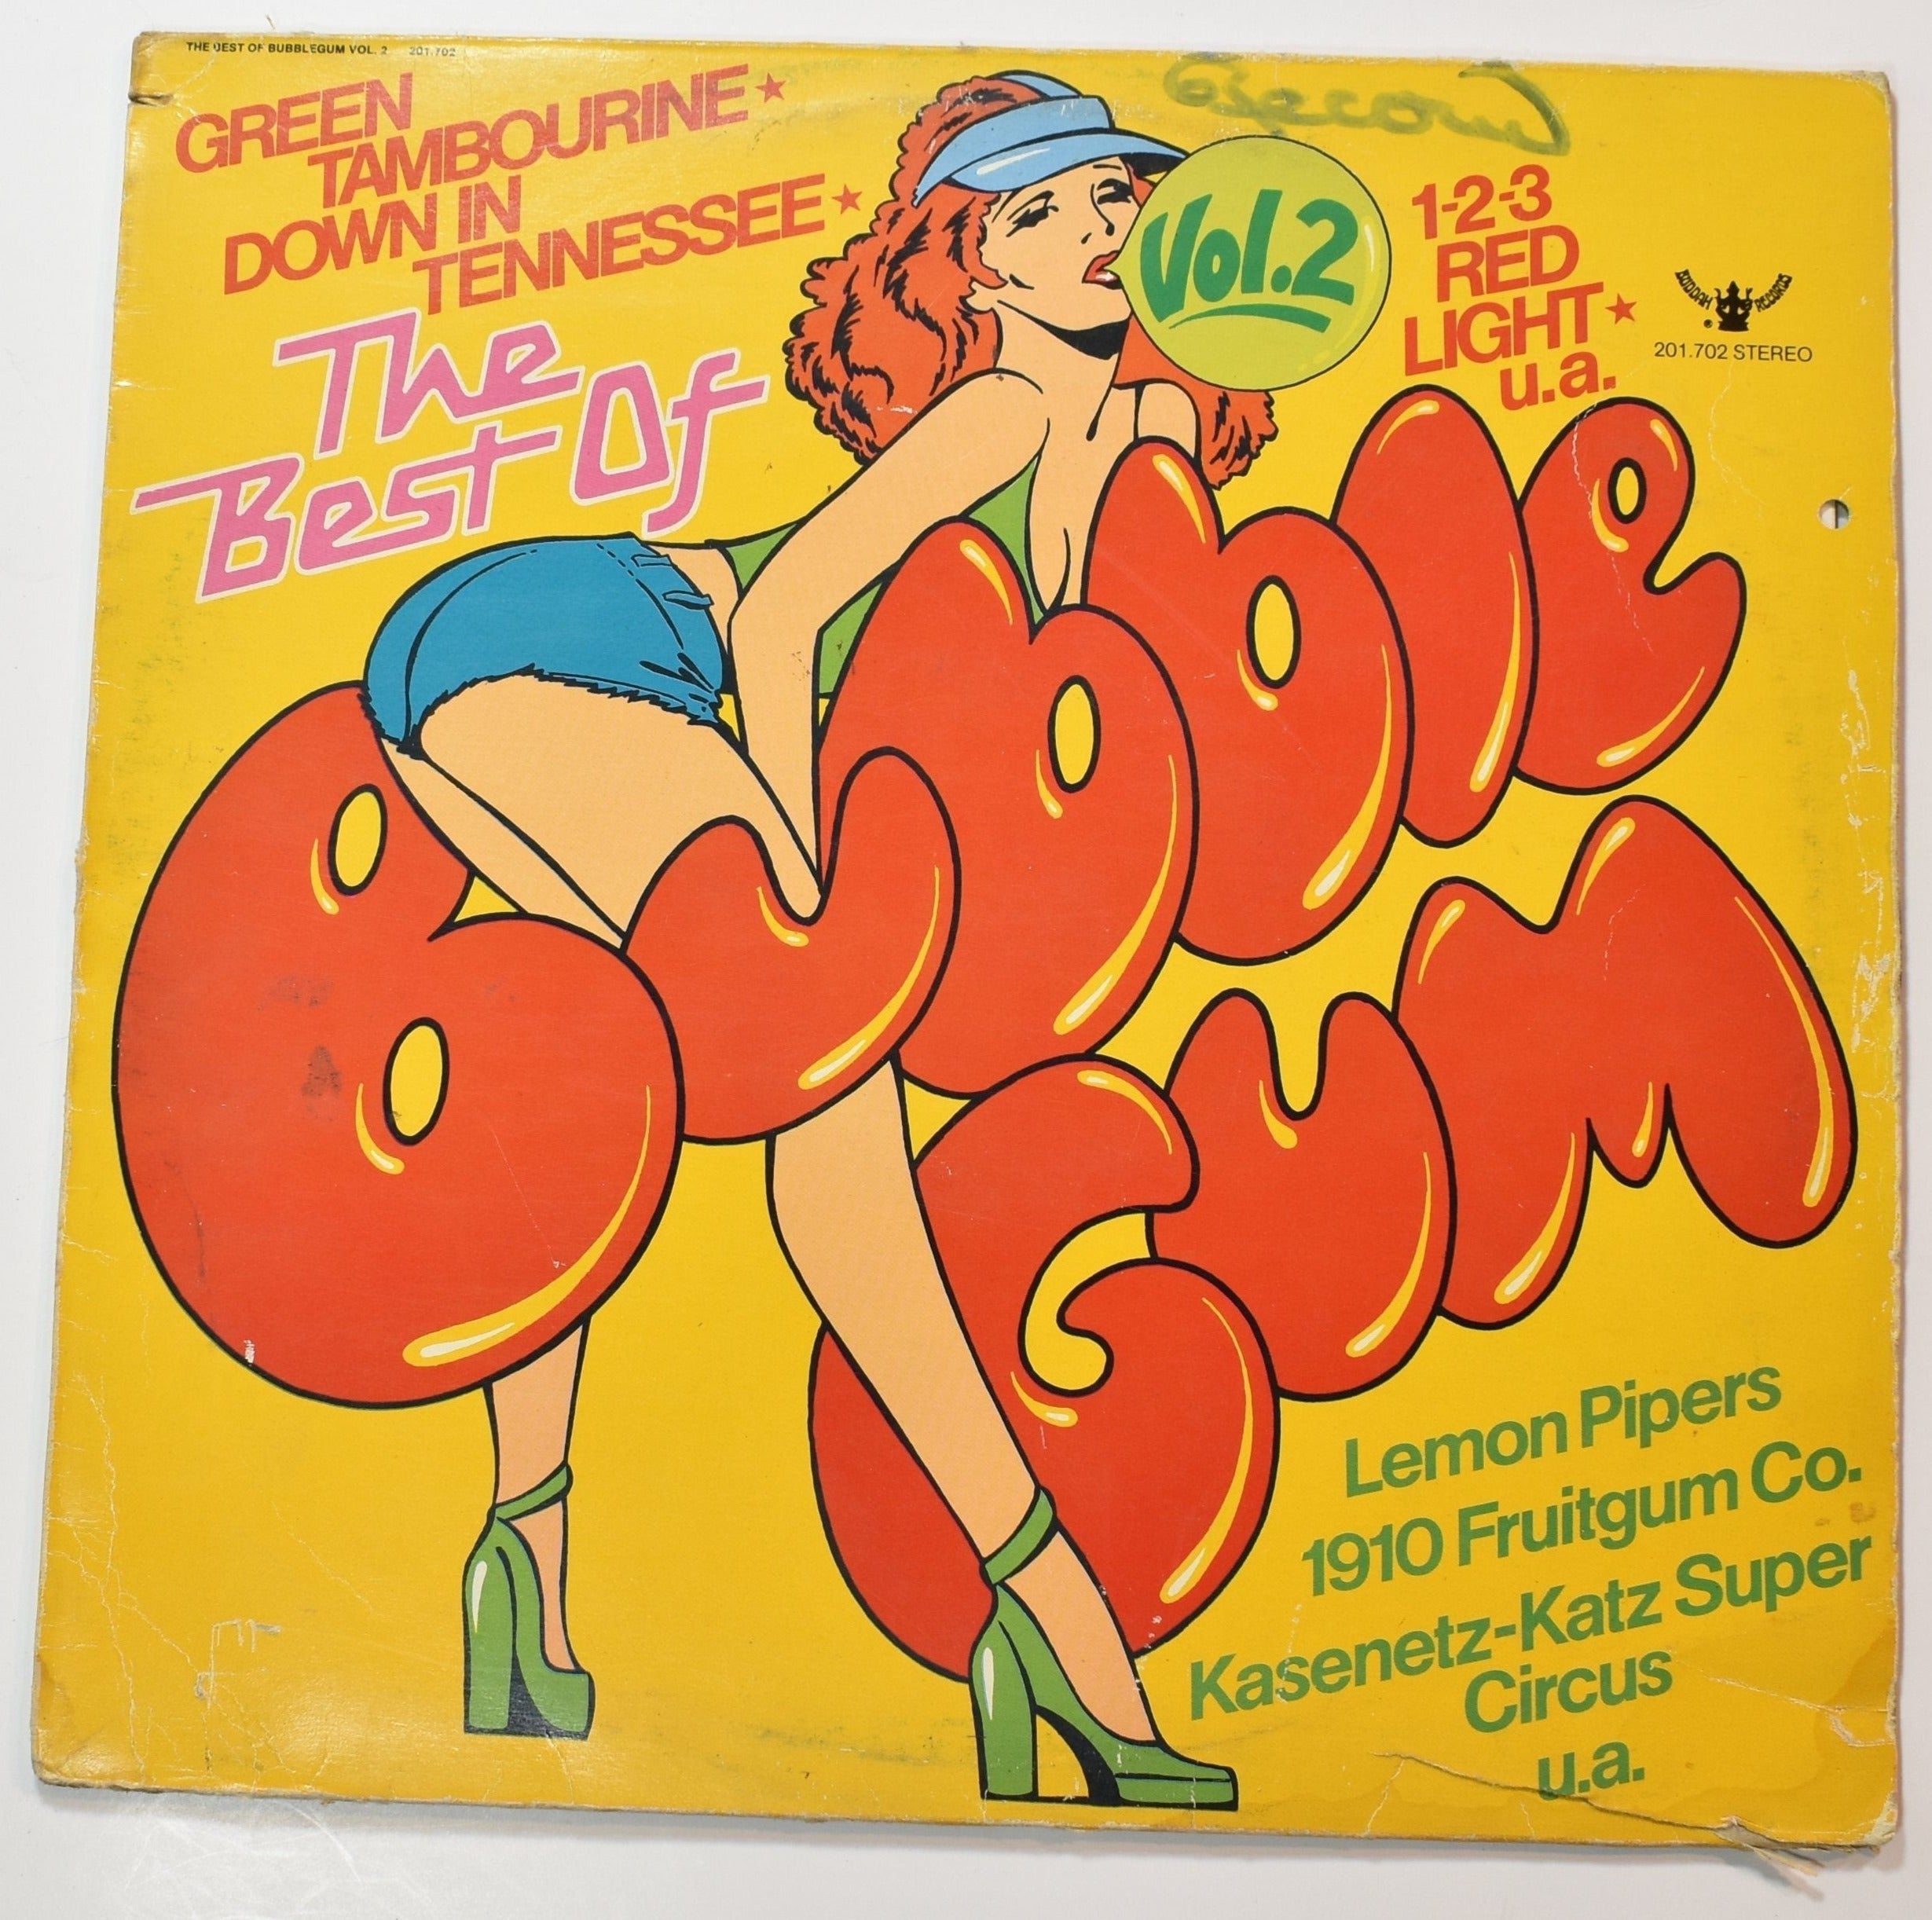 Vinyl Music Record The Best Of bubble Gum Vol. 2 used record